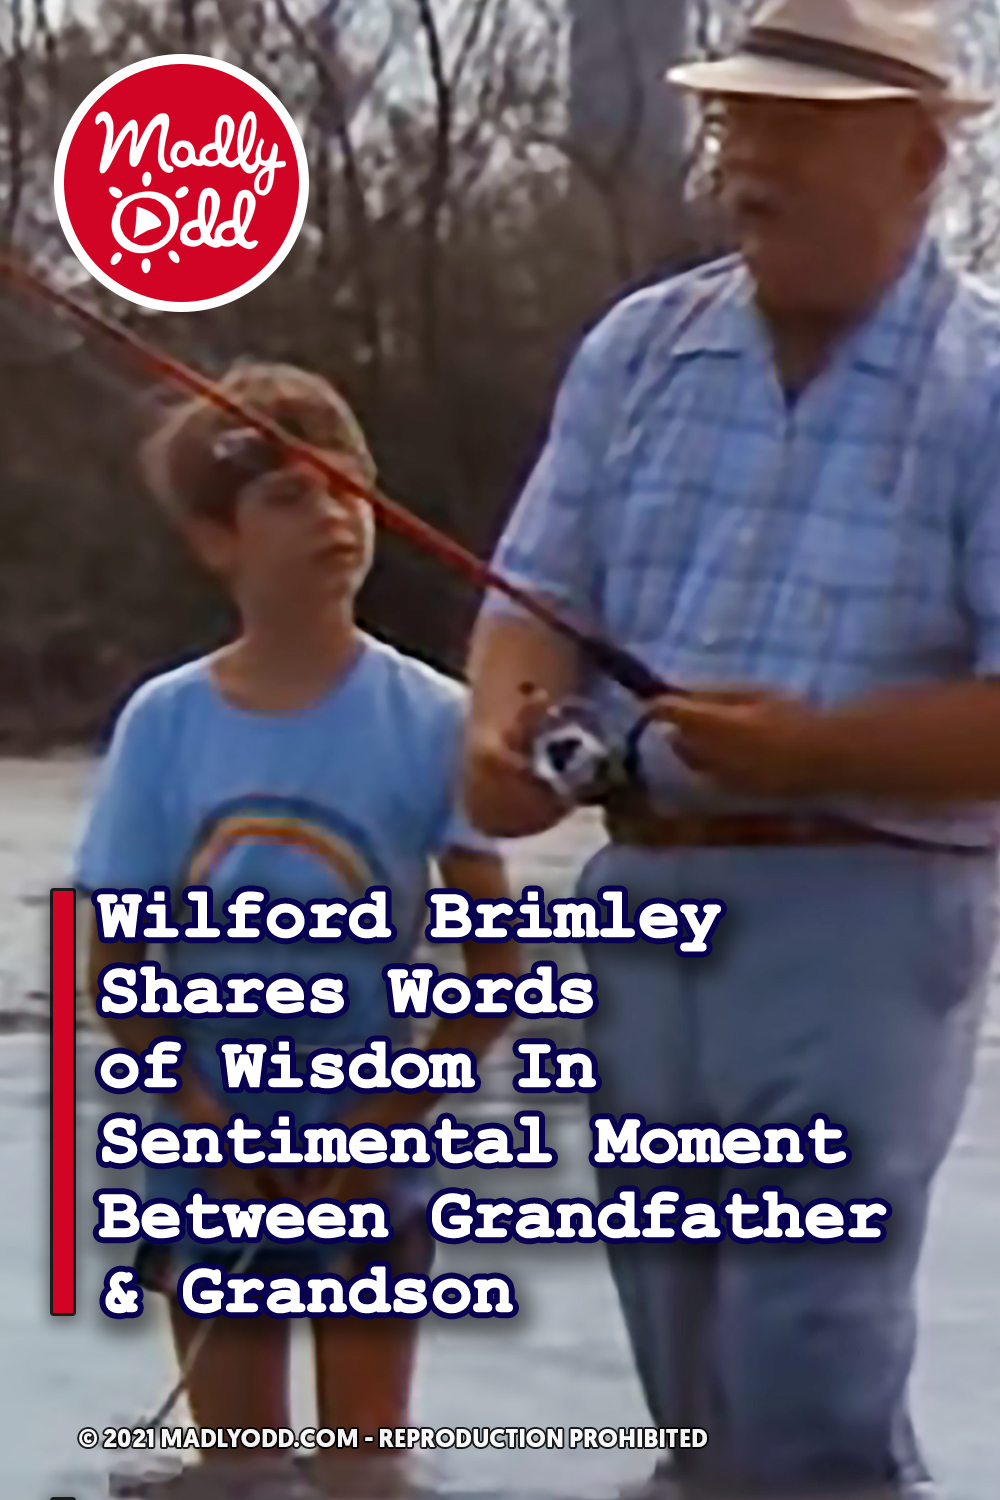 Wilford Brimley Shares Words of Wisdom In Sentimental Moment Between Grandfather & Grandson